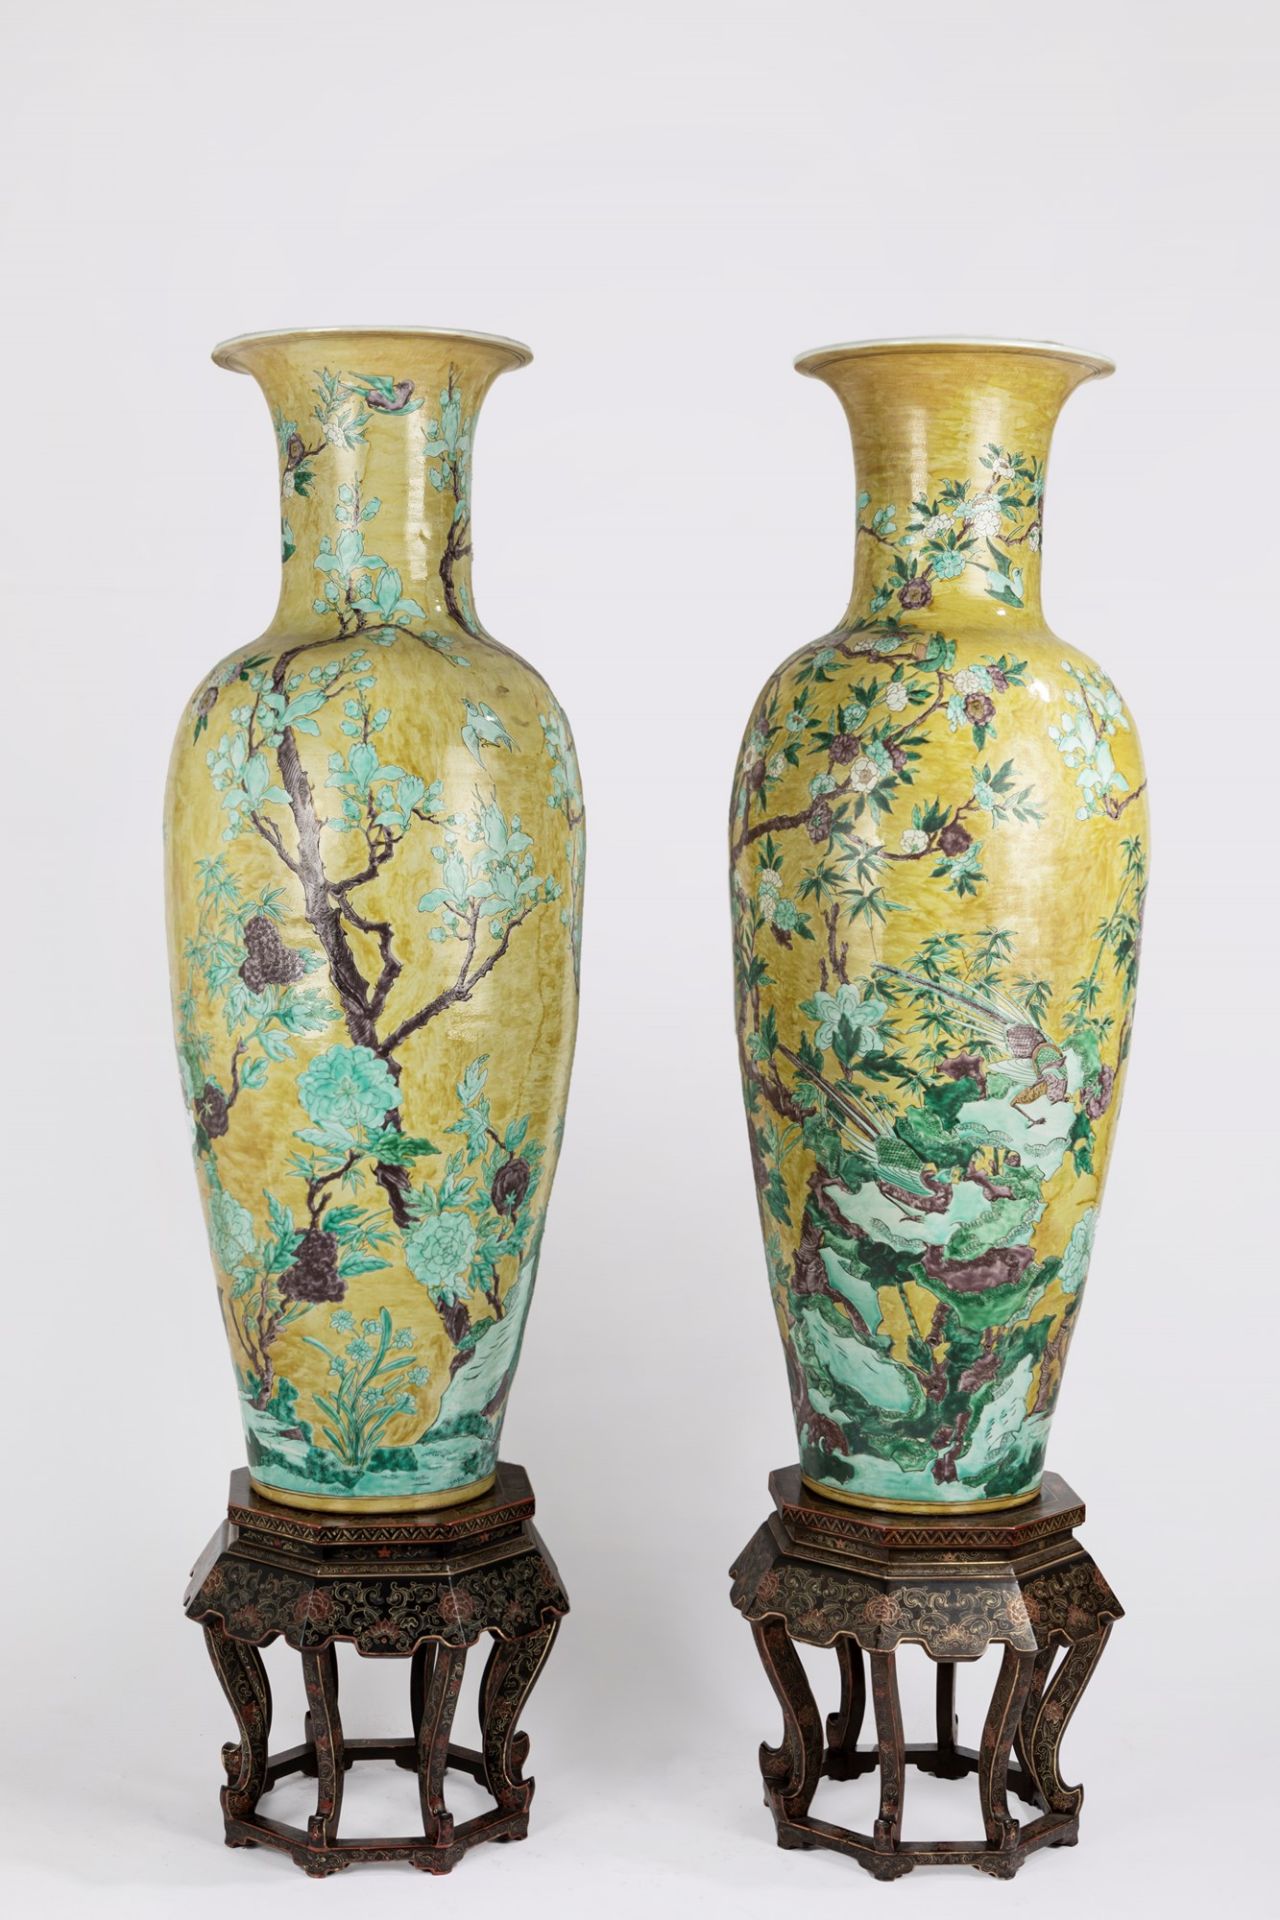 A pair of very large yellow ground porcelain vases. China, mid 20th century